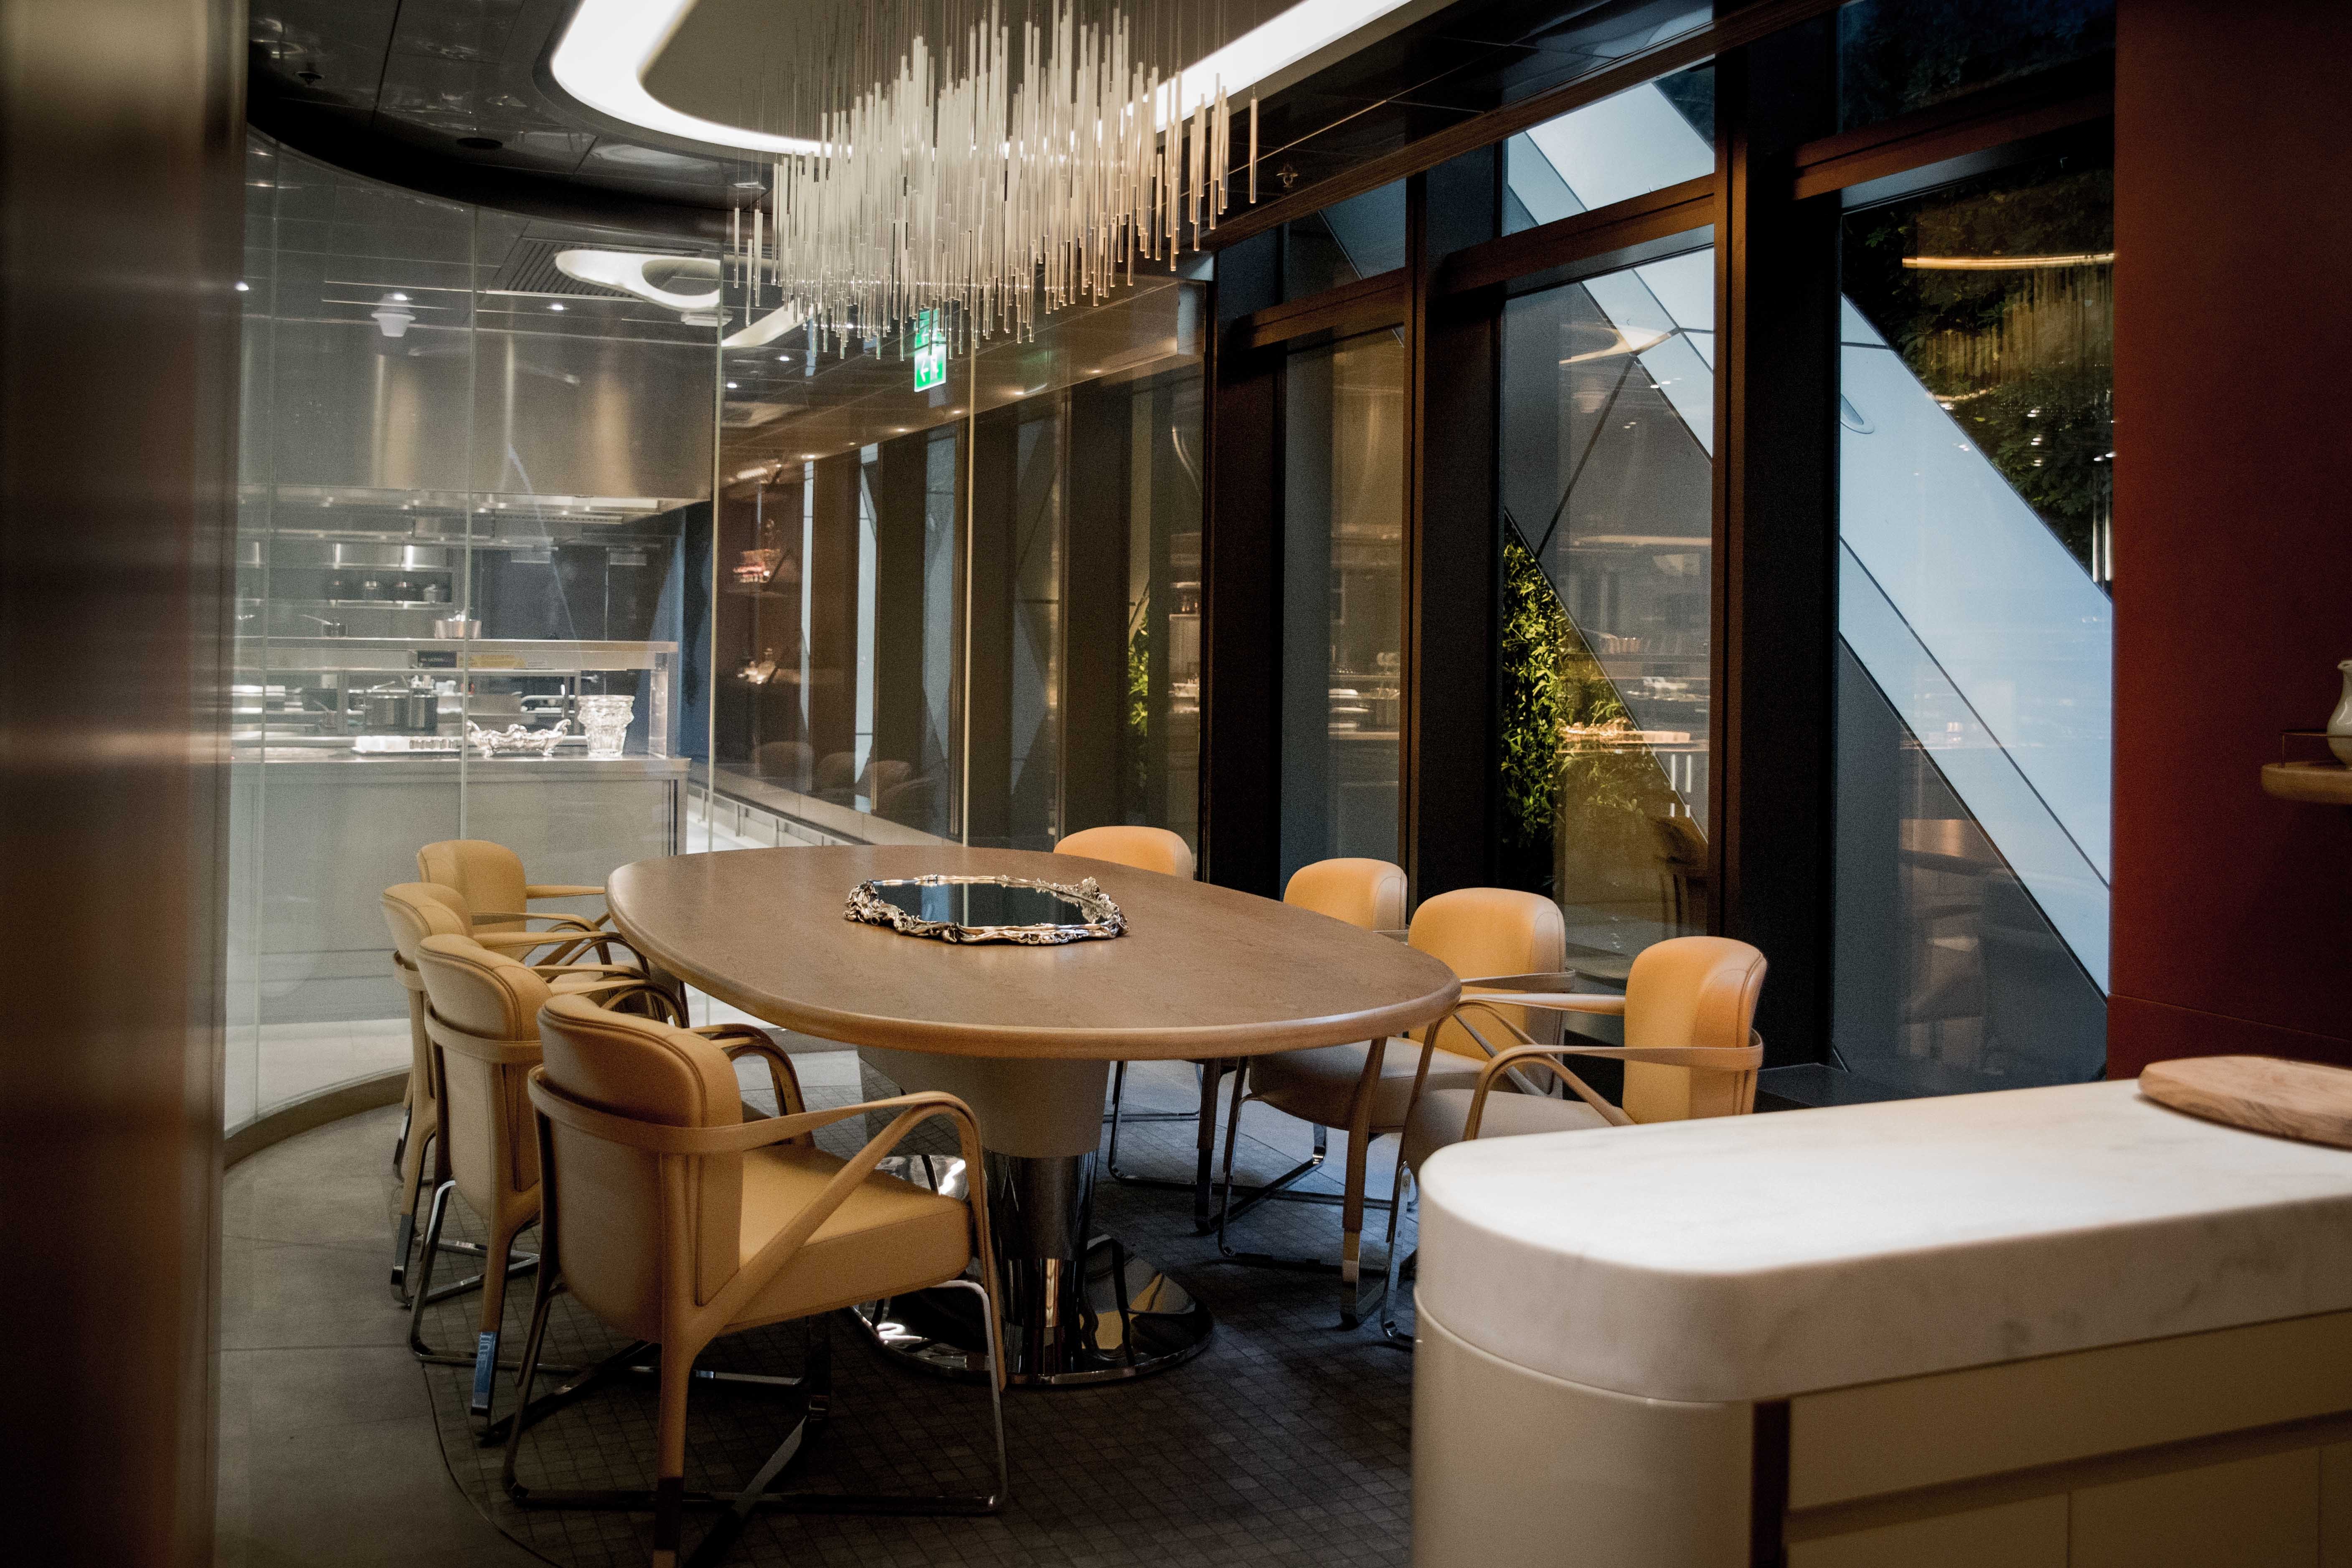 Alain Ducasse at Morpheus has a plush decor, with chandeliers like a cascading waterfall. Photos: handouts